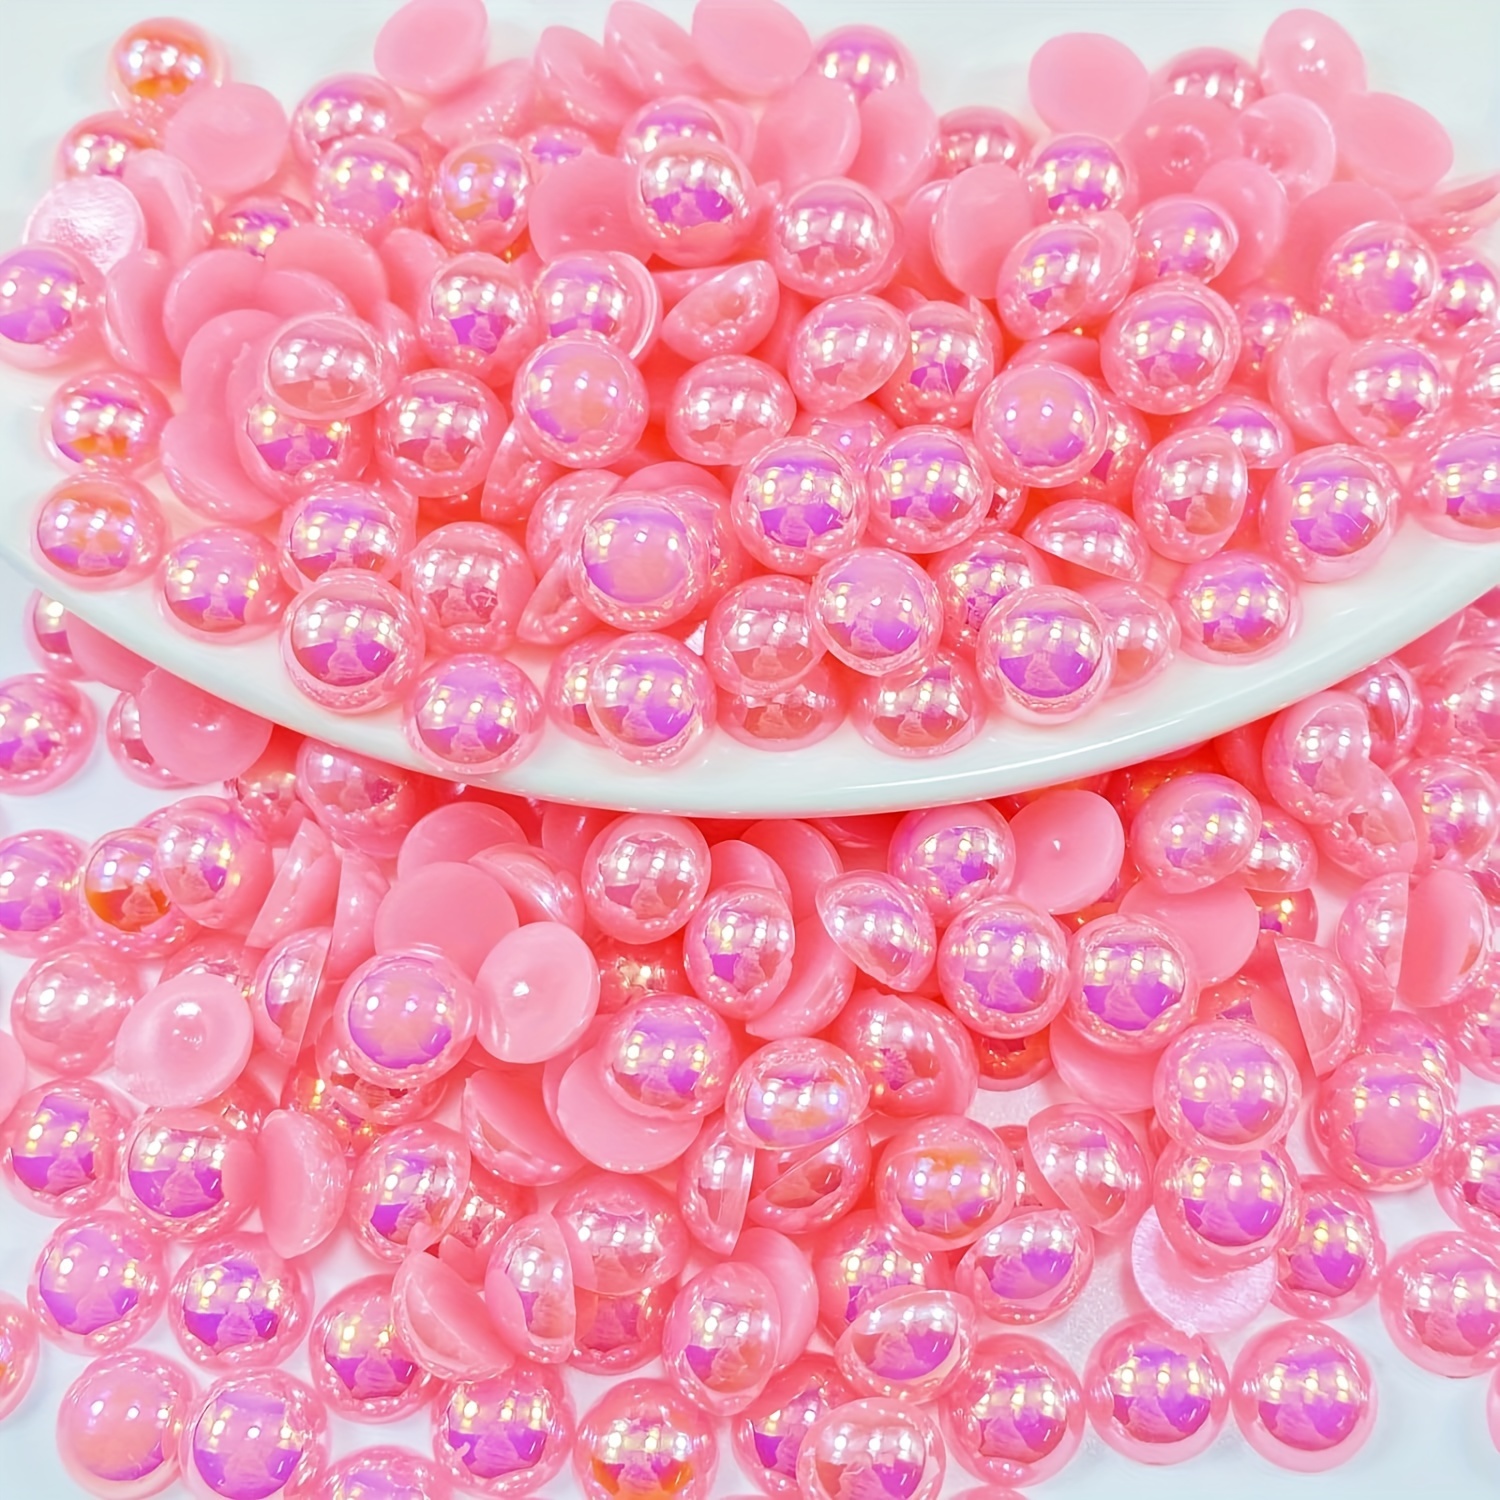 1500pcs 4mm Half Pearl White AB Flatback Beads for Crafts DIY Round Plastic  Half Flat Back Pearls Loose Bead for Cup Shoes Wedding Dress Decoration